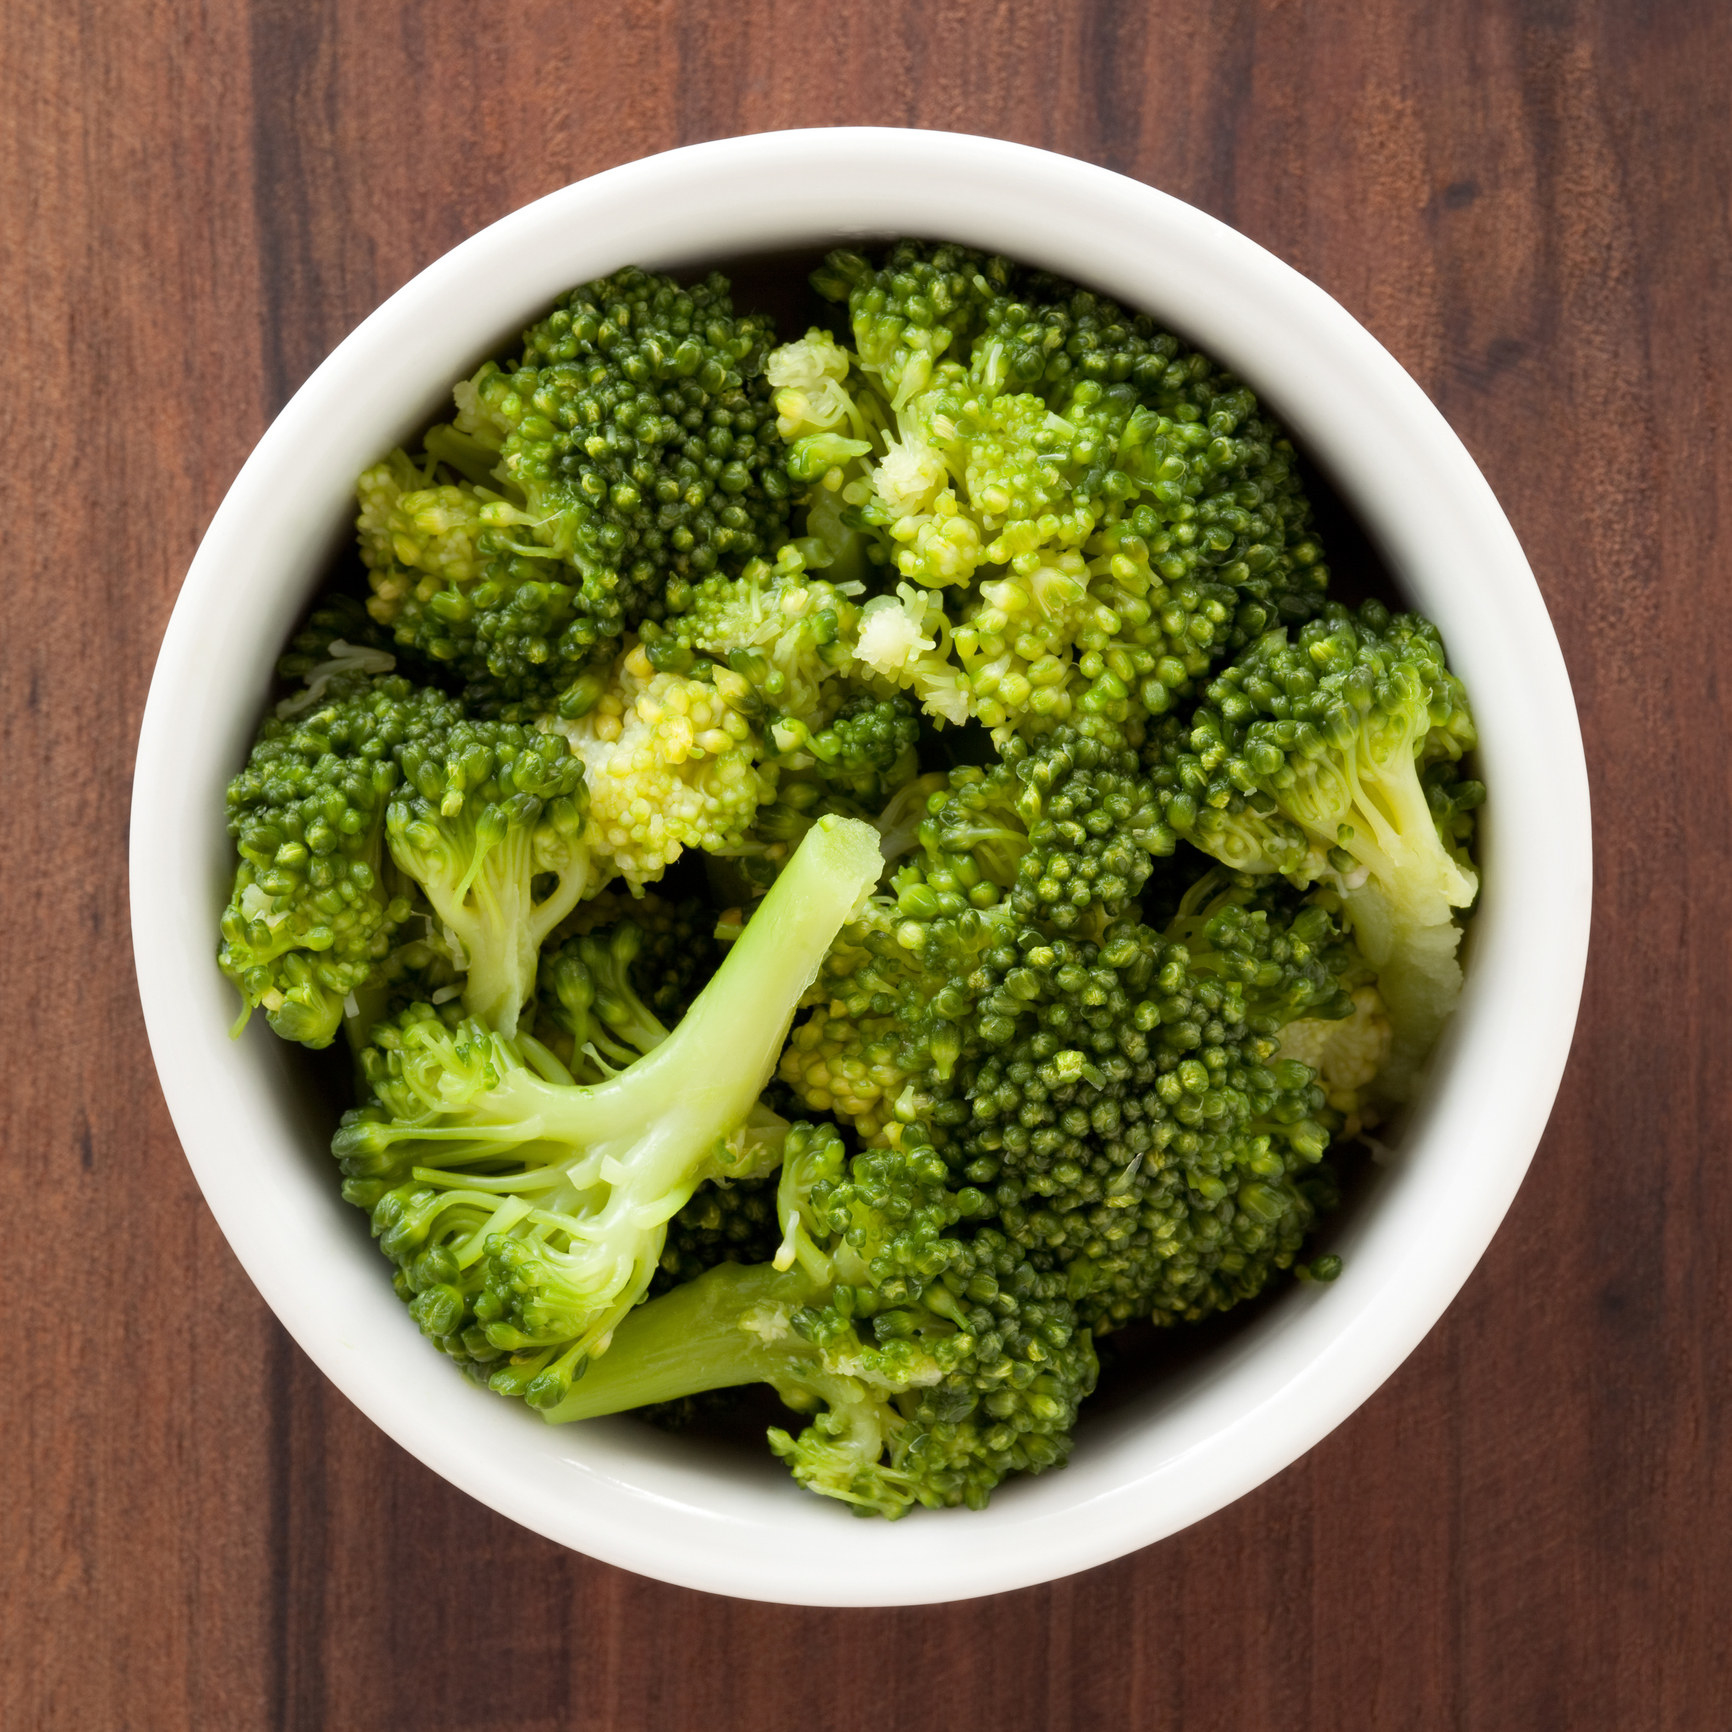 A stock photo of boiled broccoli in a bowl